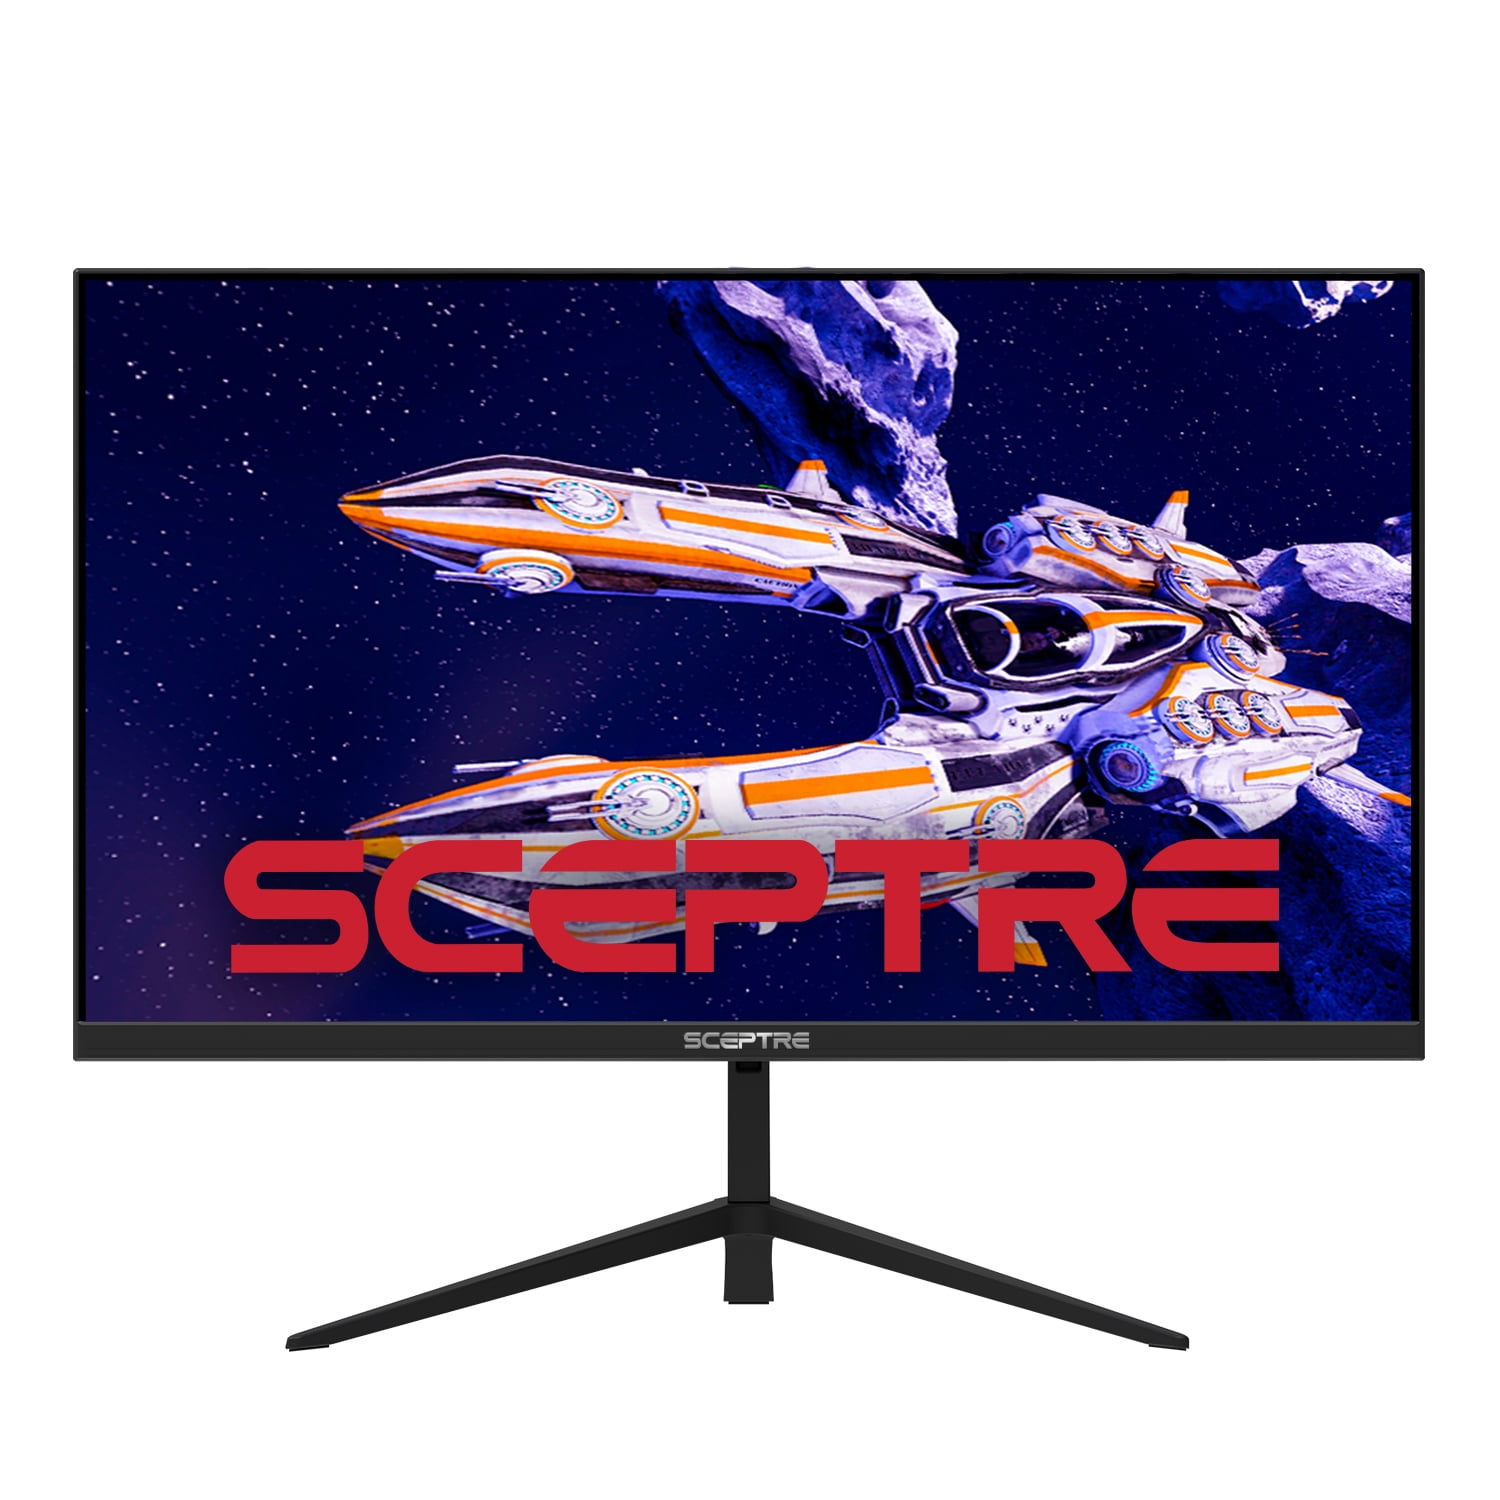 Sceptre 27-inch IPS Gaming Monitor up to 165Hz DisplayPort HDMI 300 Lux 99%  sRGB Build-in Speakers, Machine Black (E278B-FPT168)